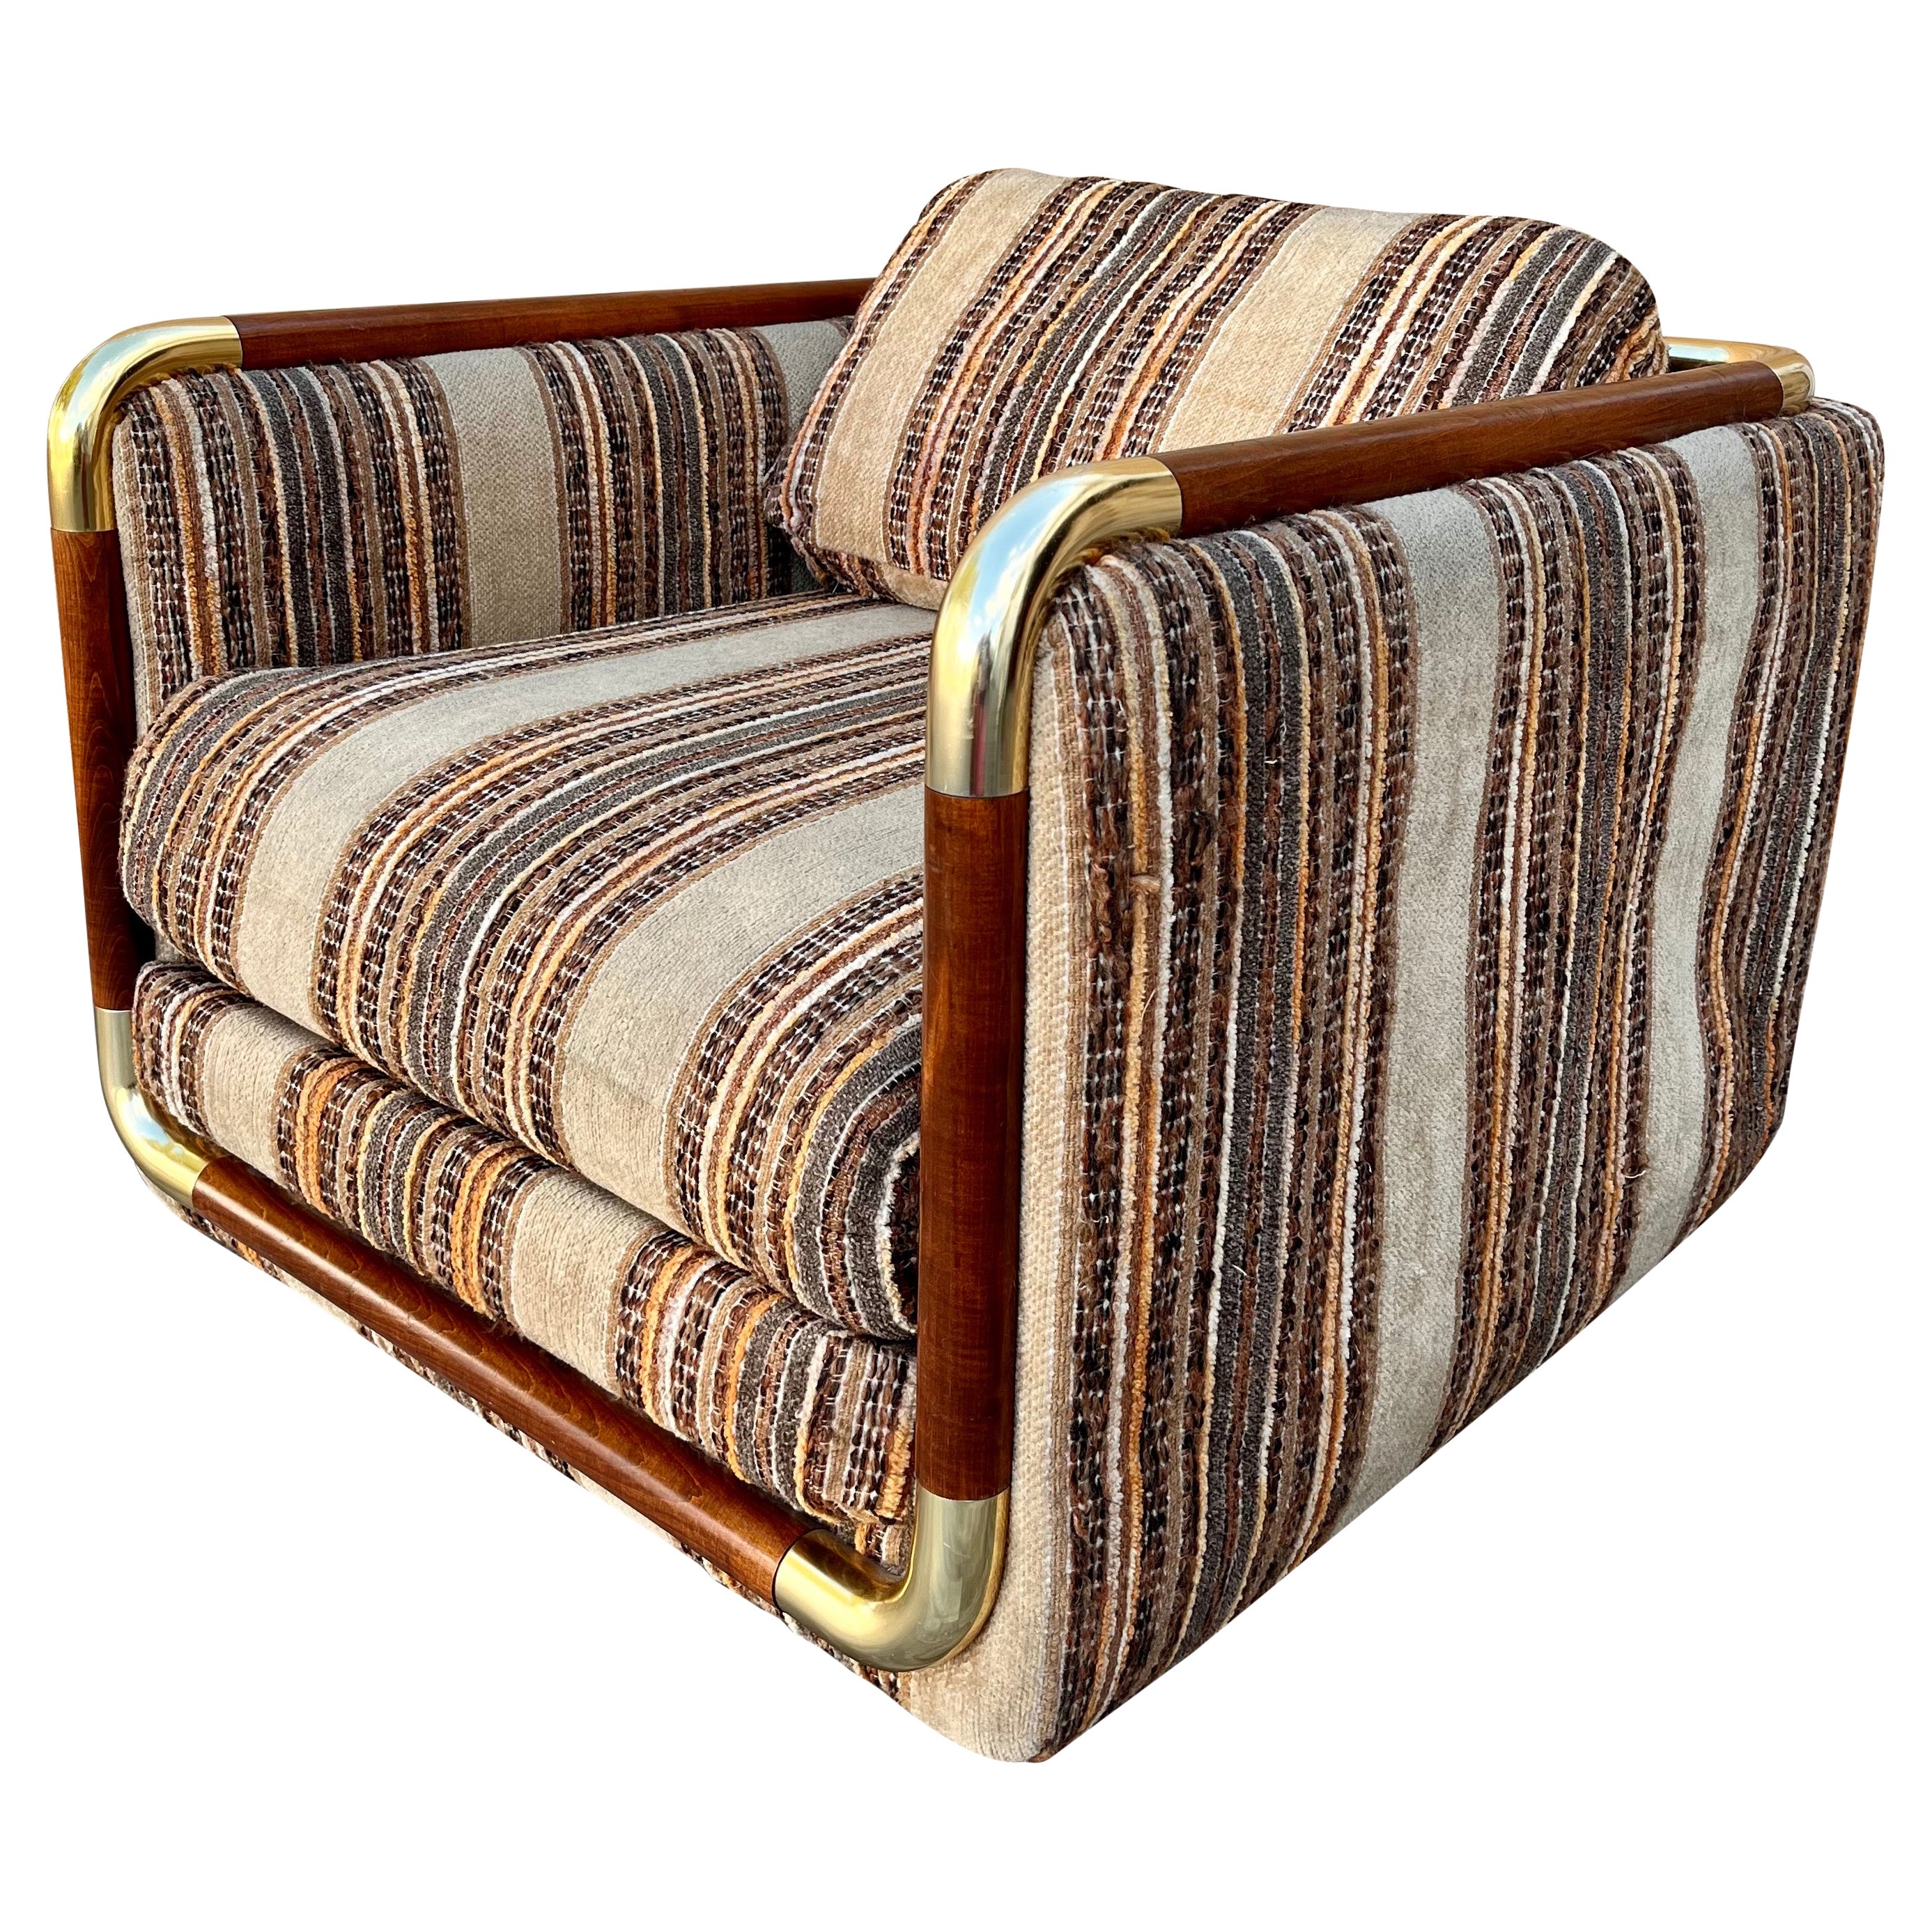 1980s Mid Century Modern Upholstered Cube Club Chair by Schweiger Industries.